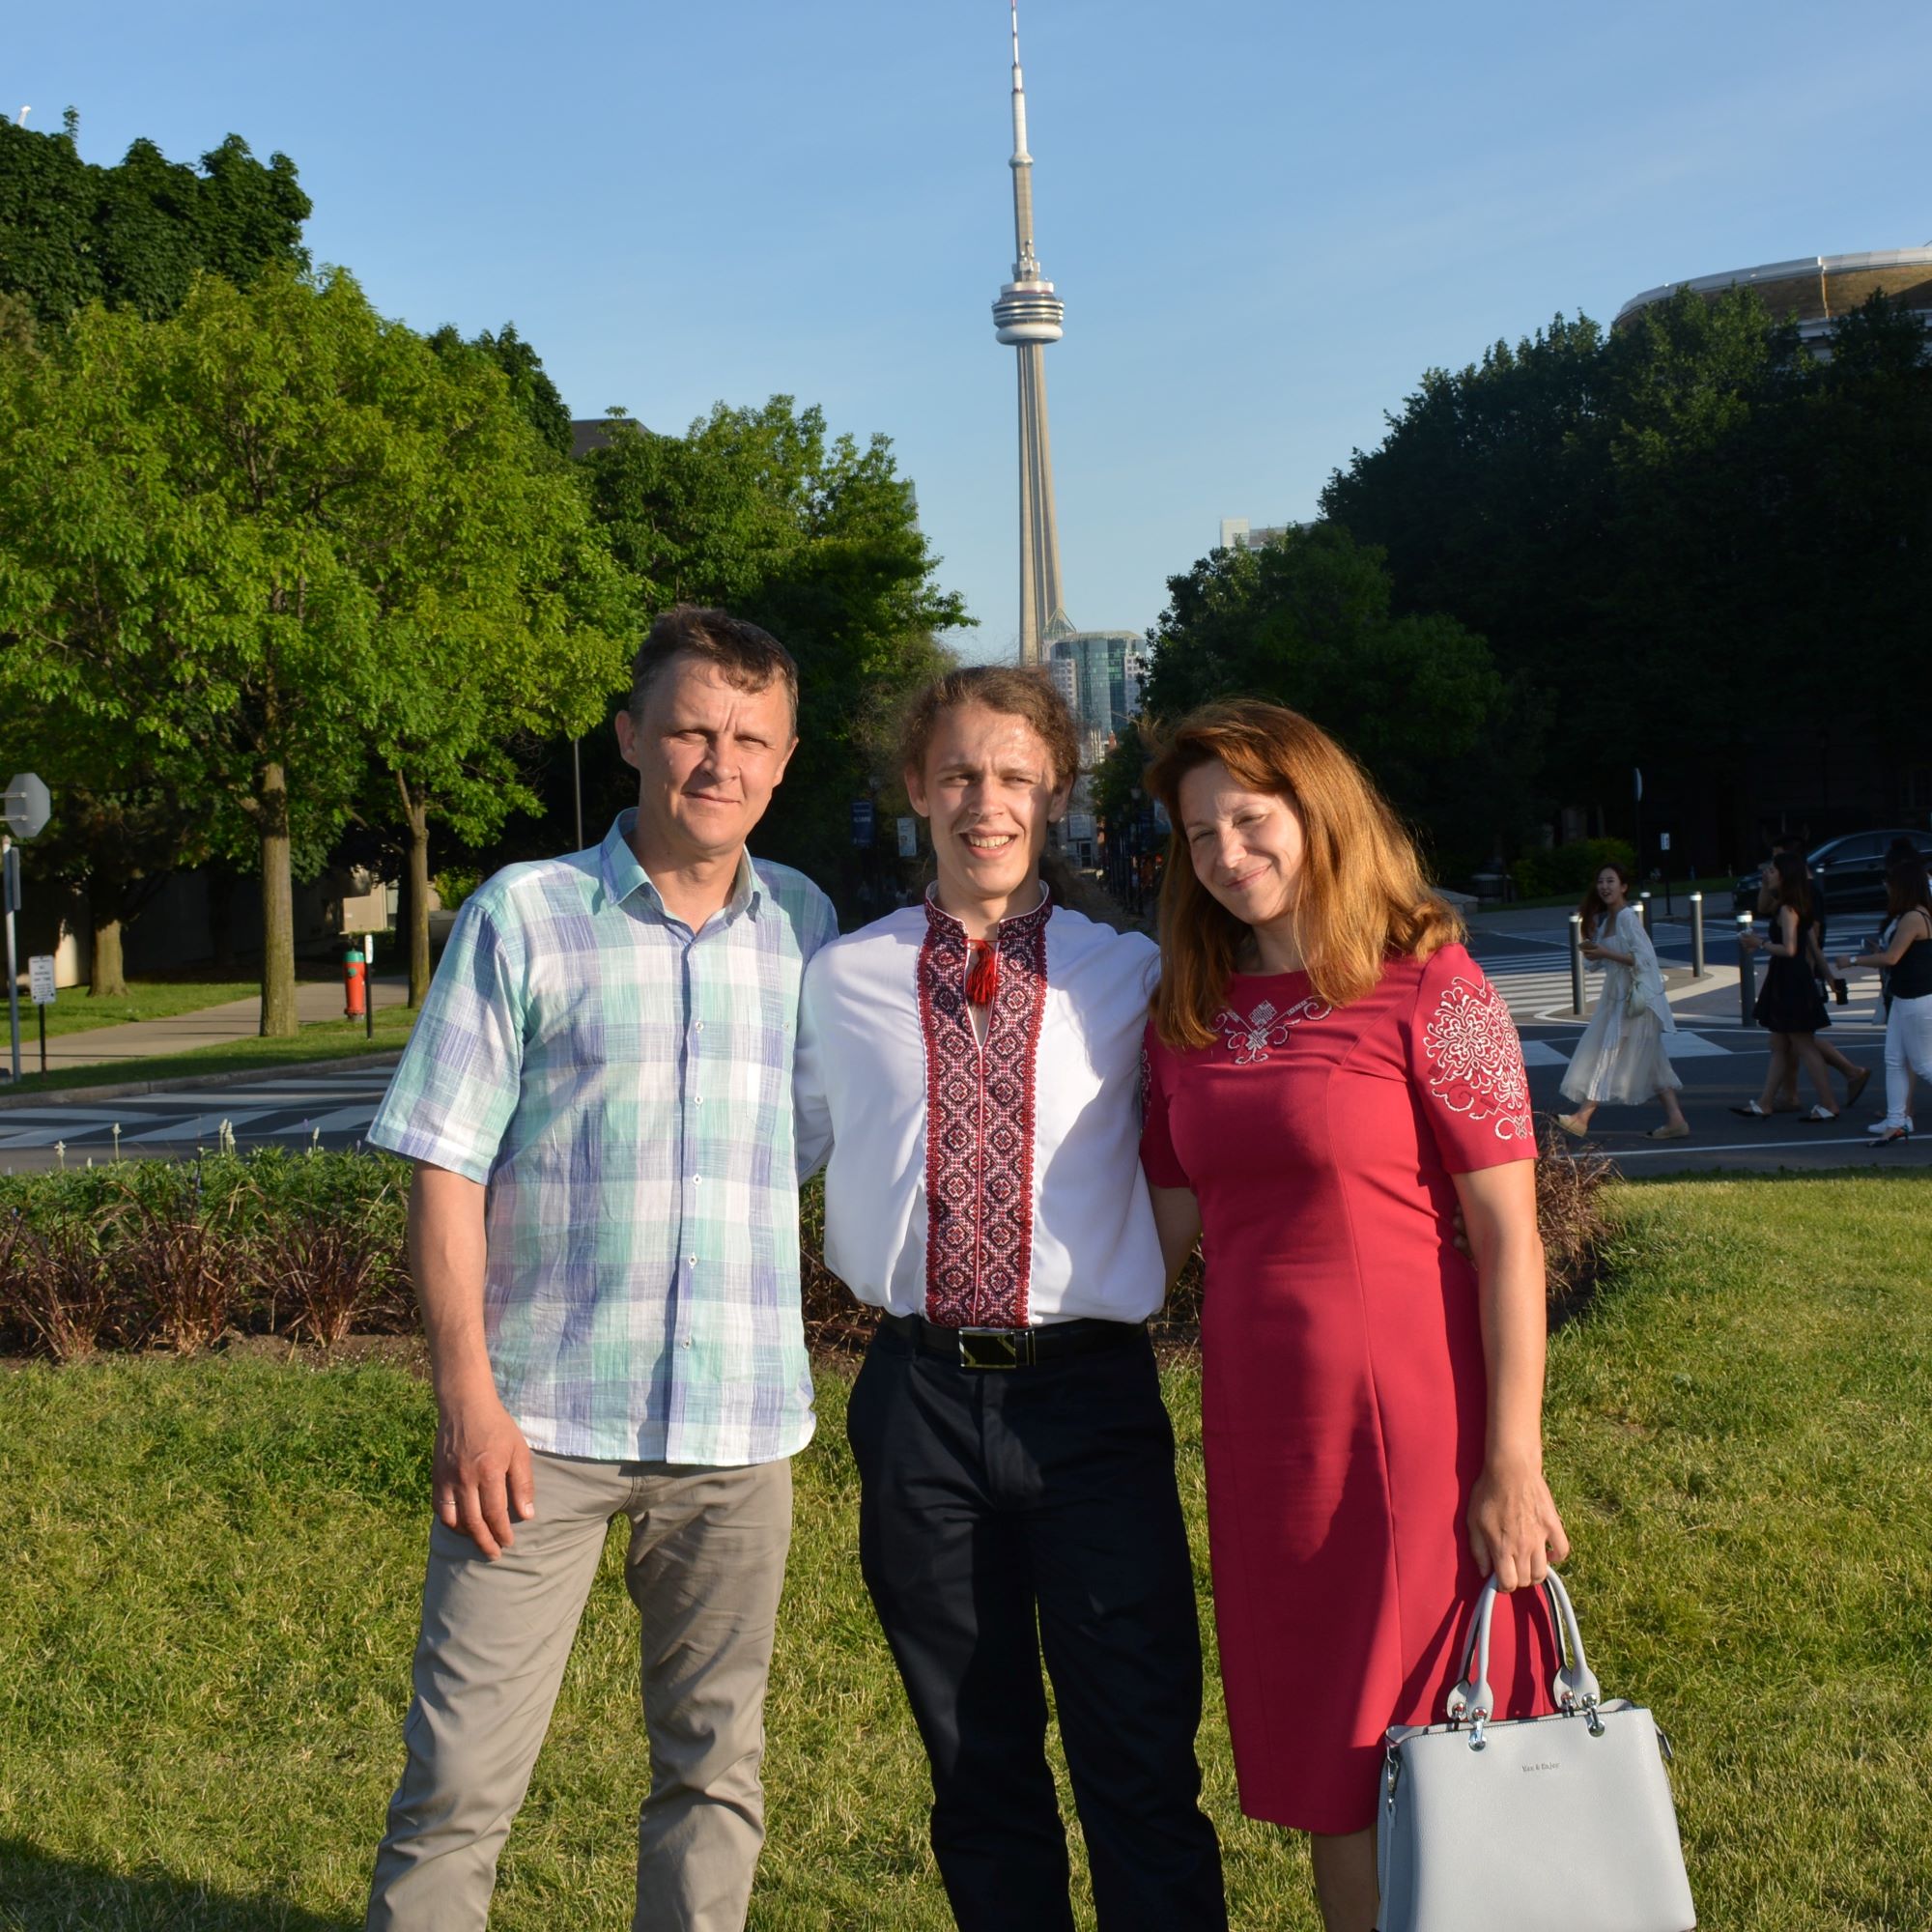 Roman and his parents in front of the CN Tower.